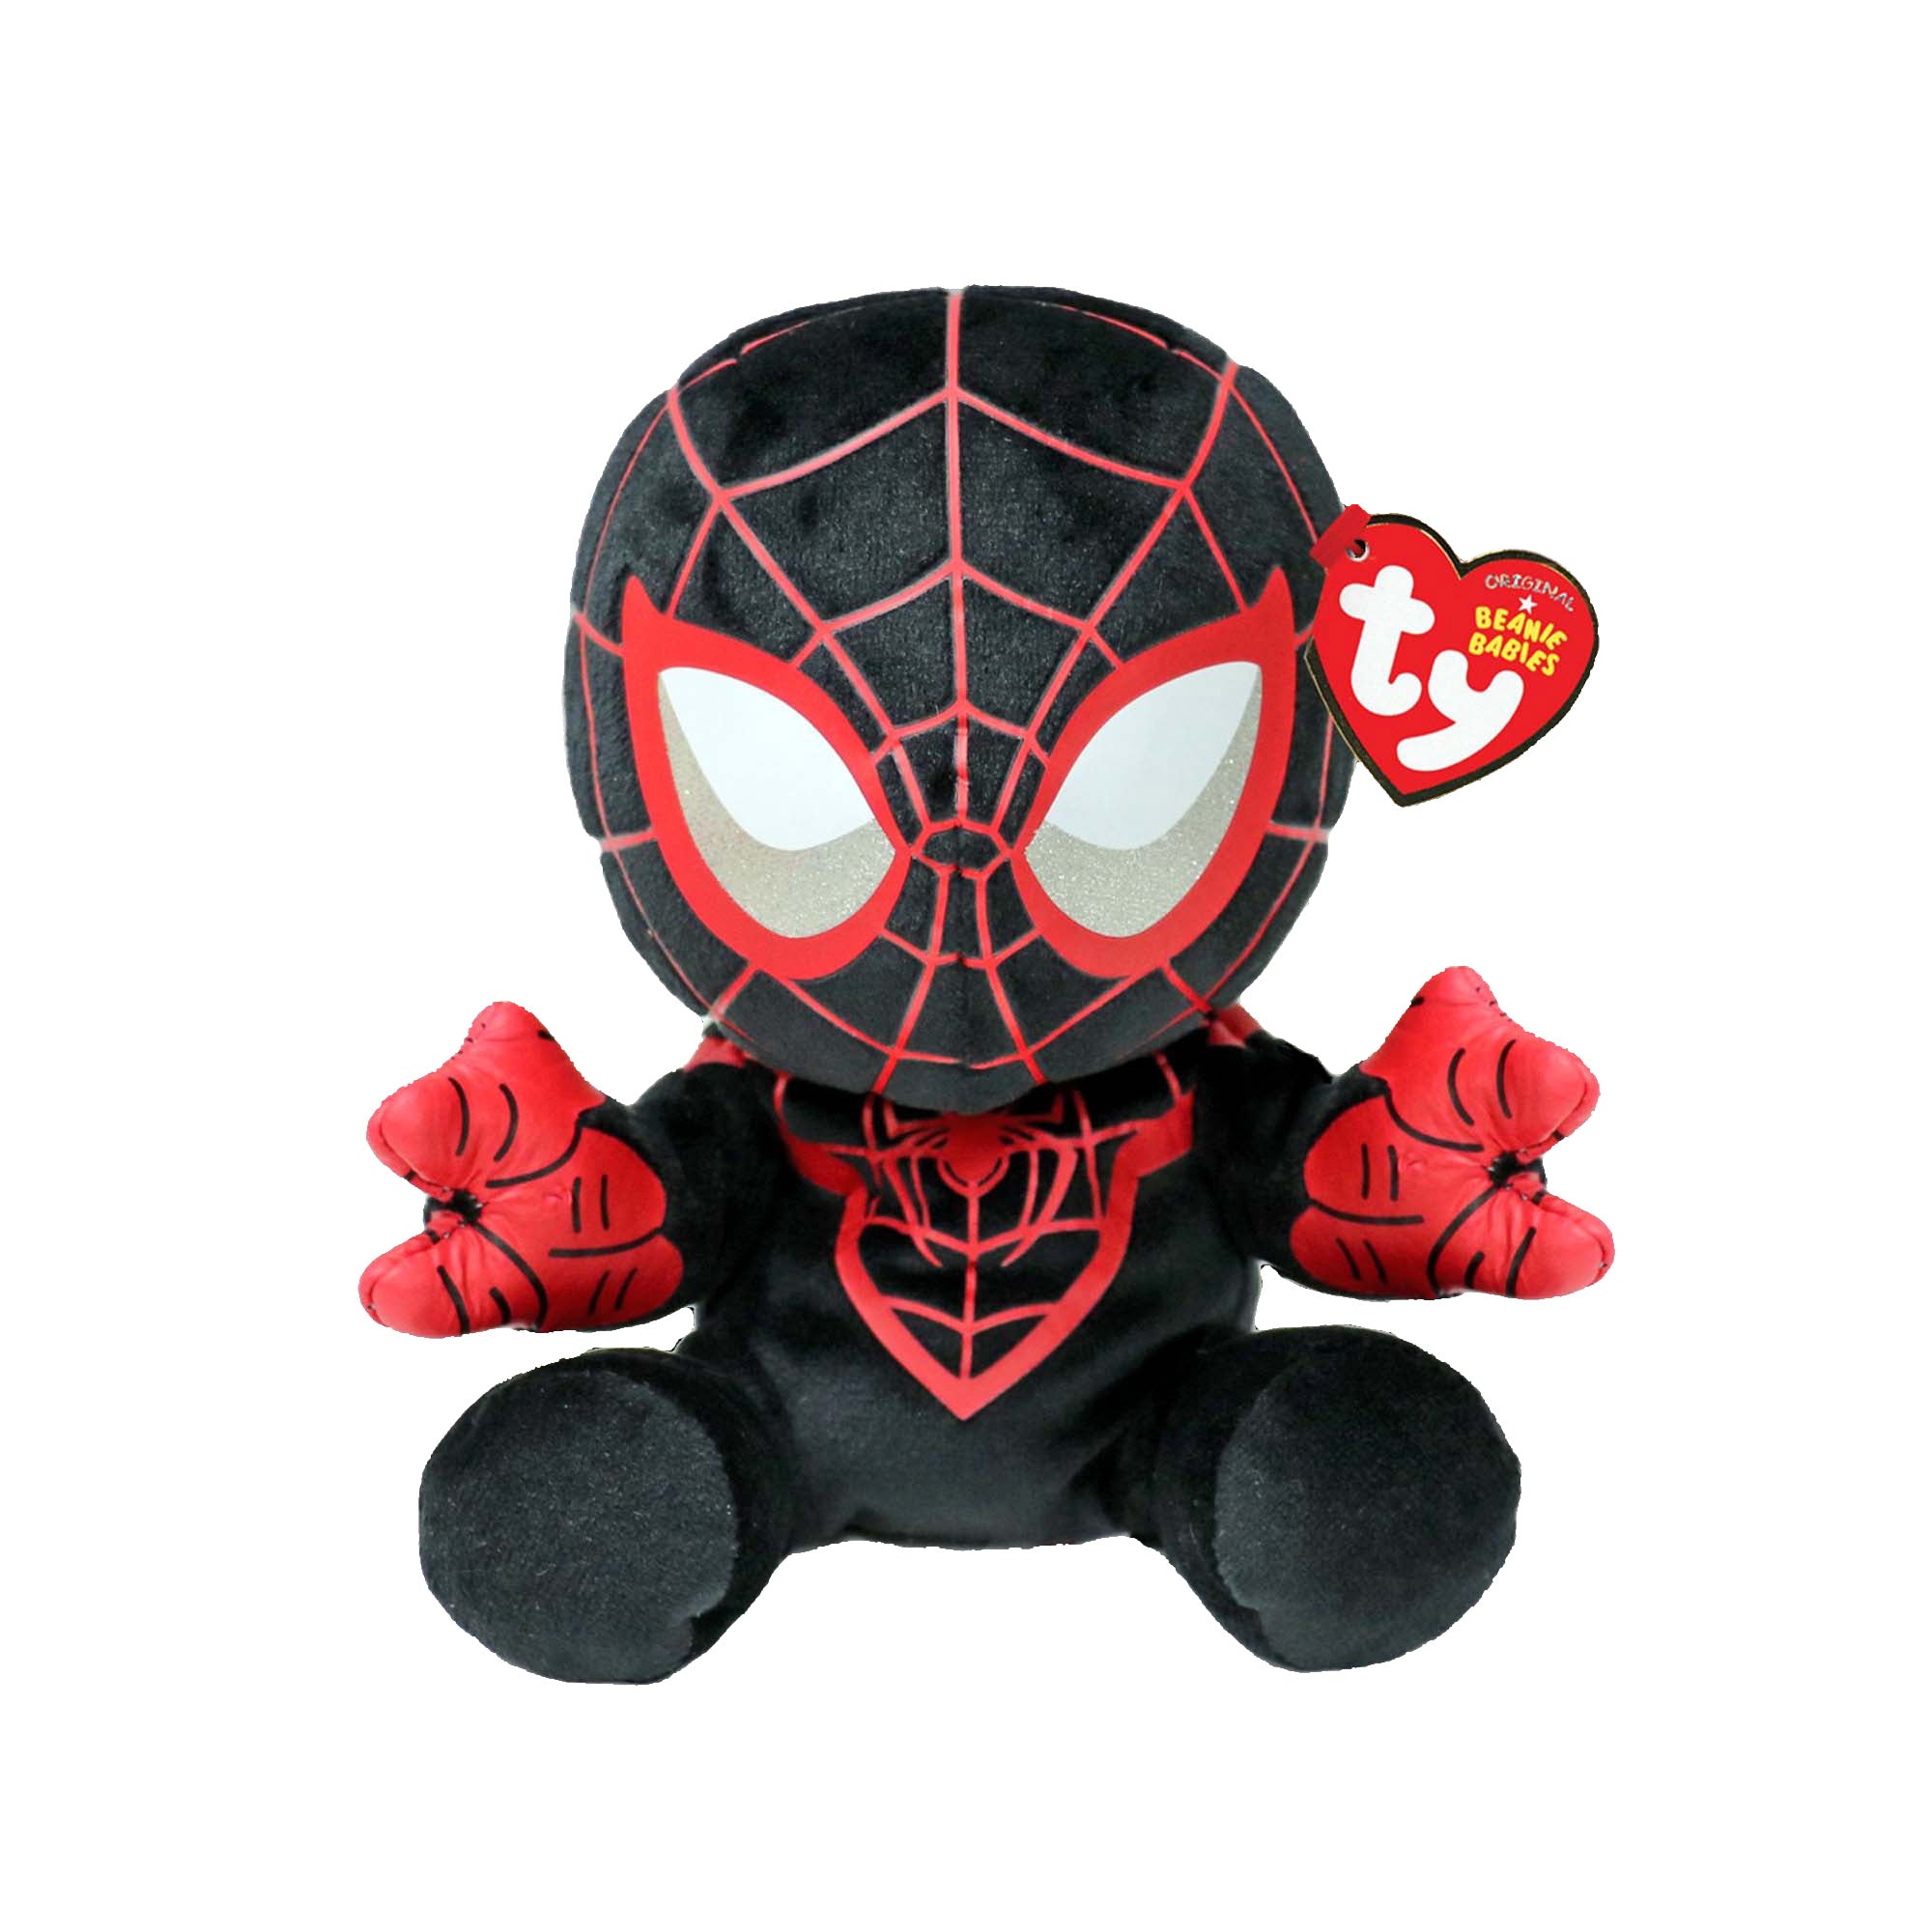 TY Marvel Soft Plush, Miles Morales, 13 Inches, 1 Count